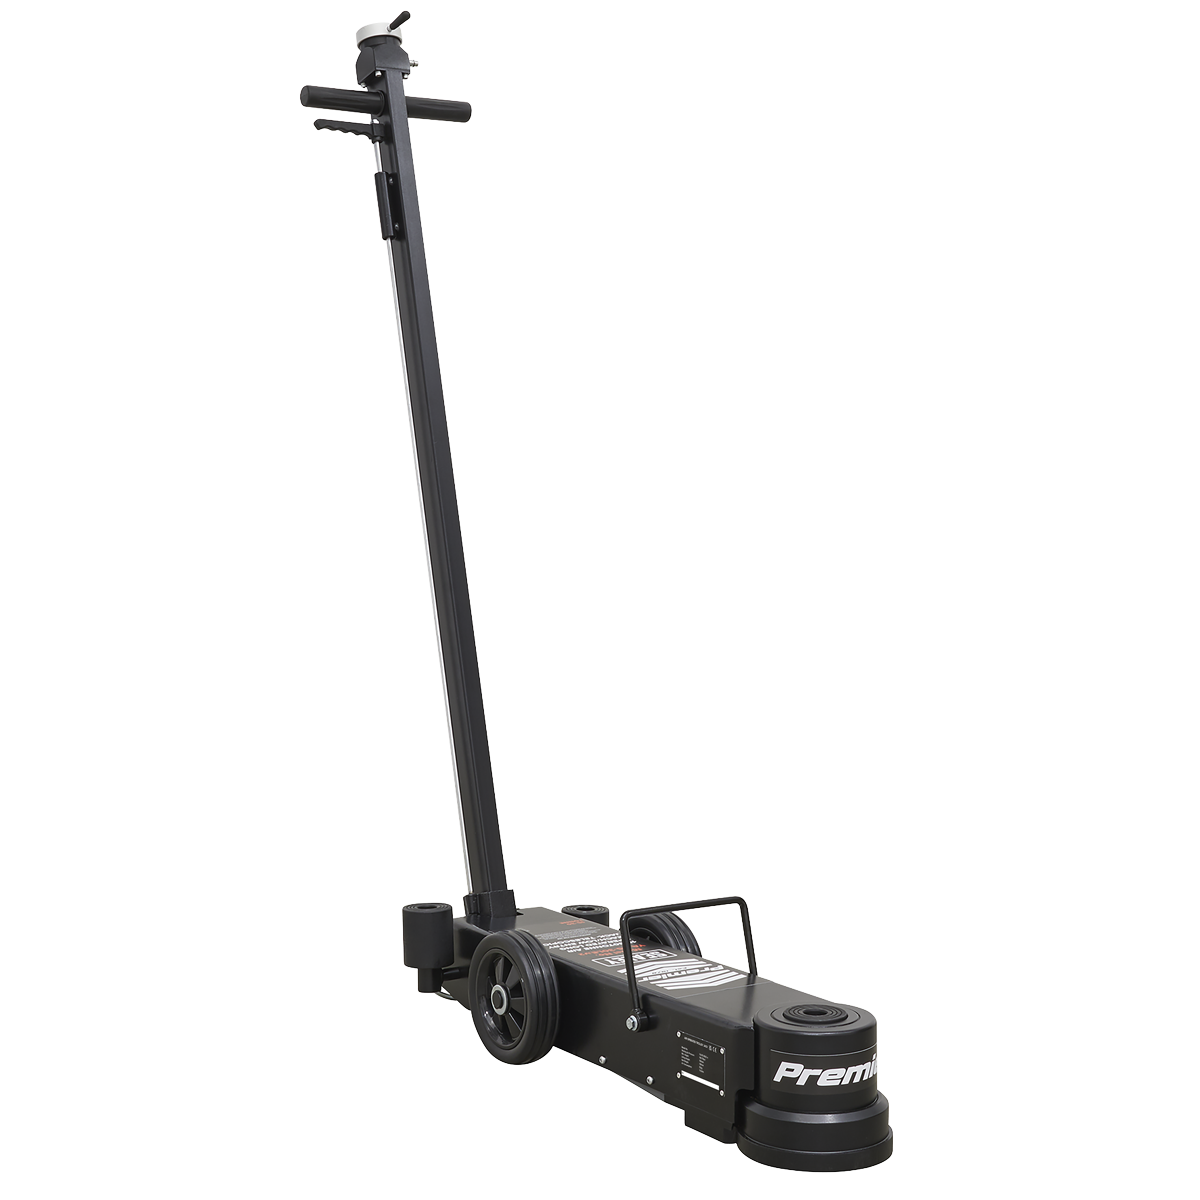 Air Operated Jack 15-30 Tonne Telescopic - Long Reach/Low Profile